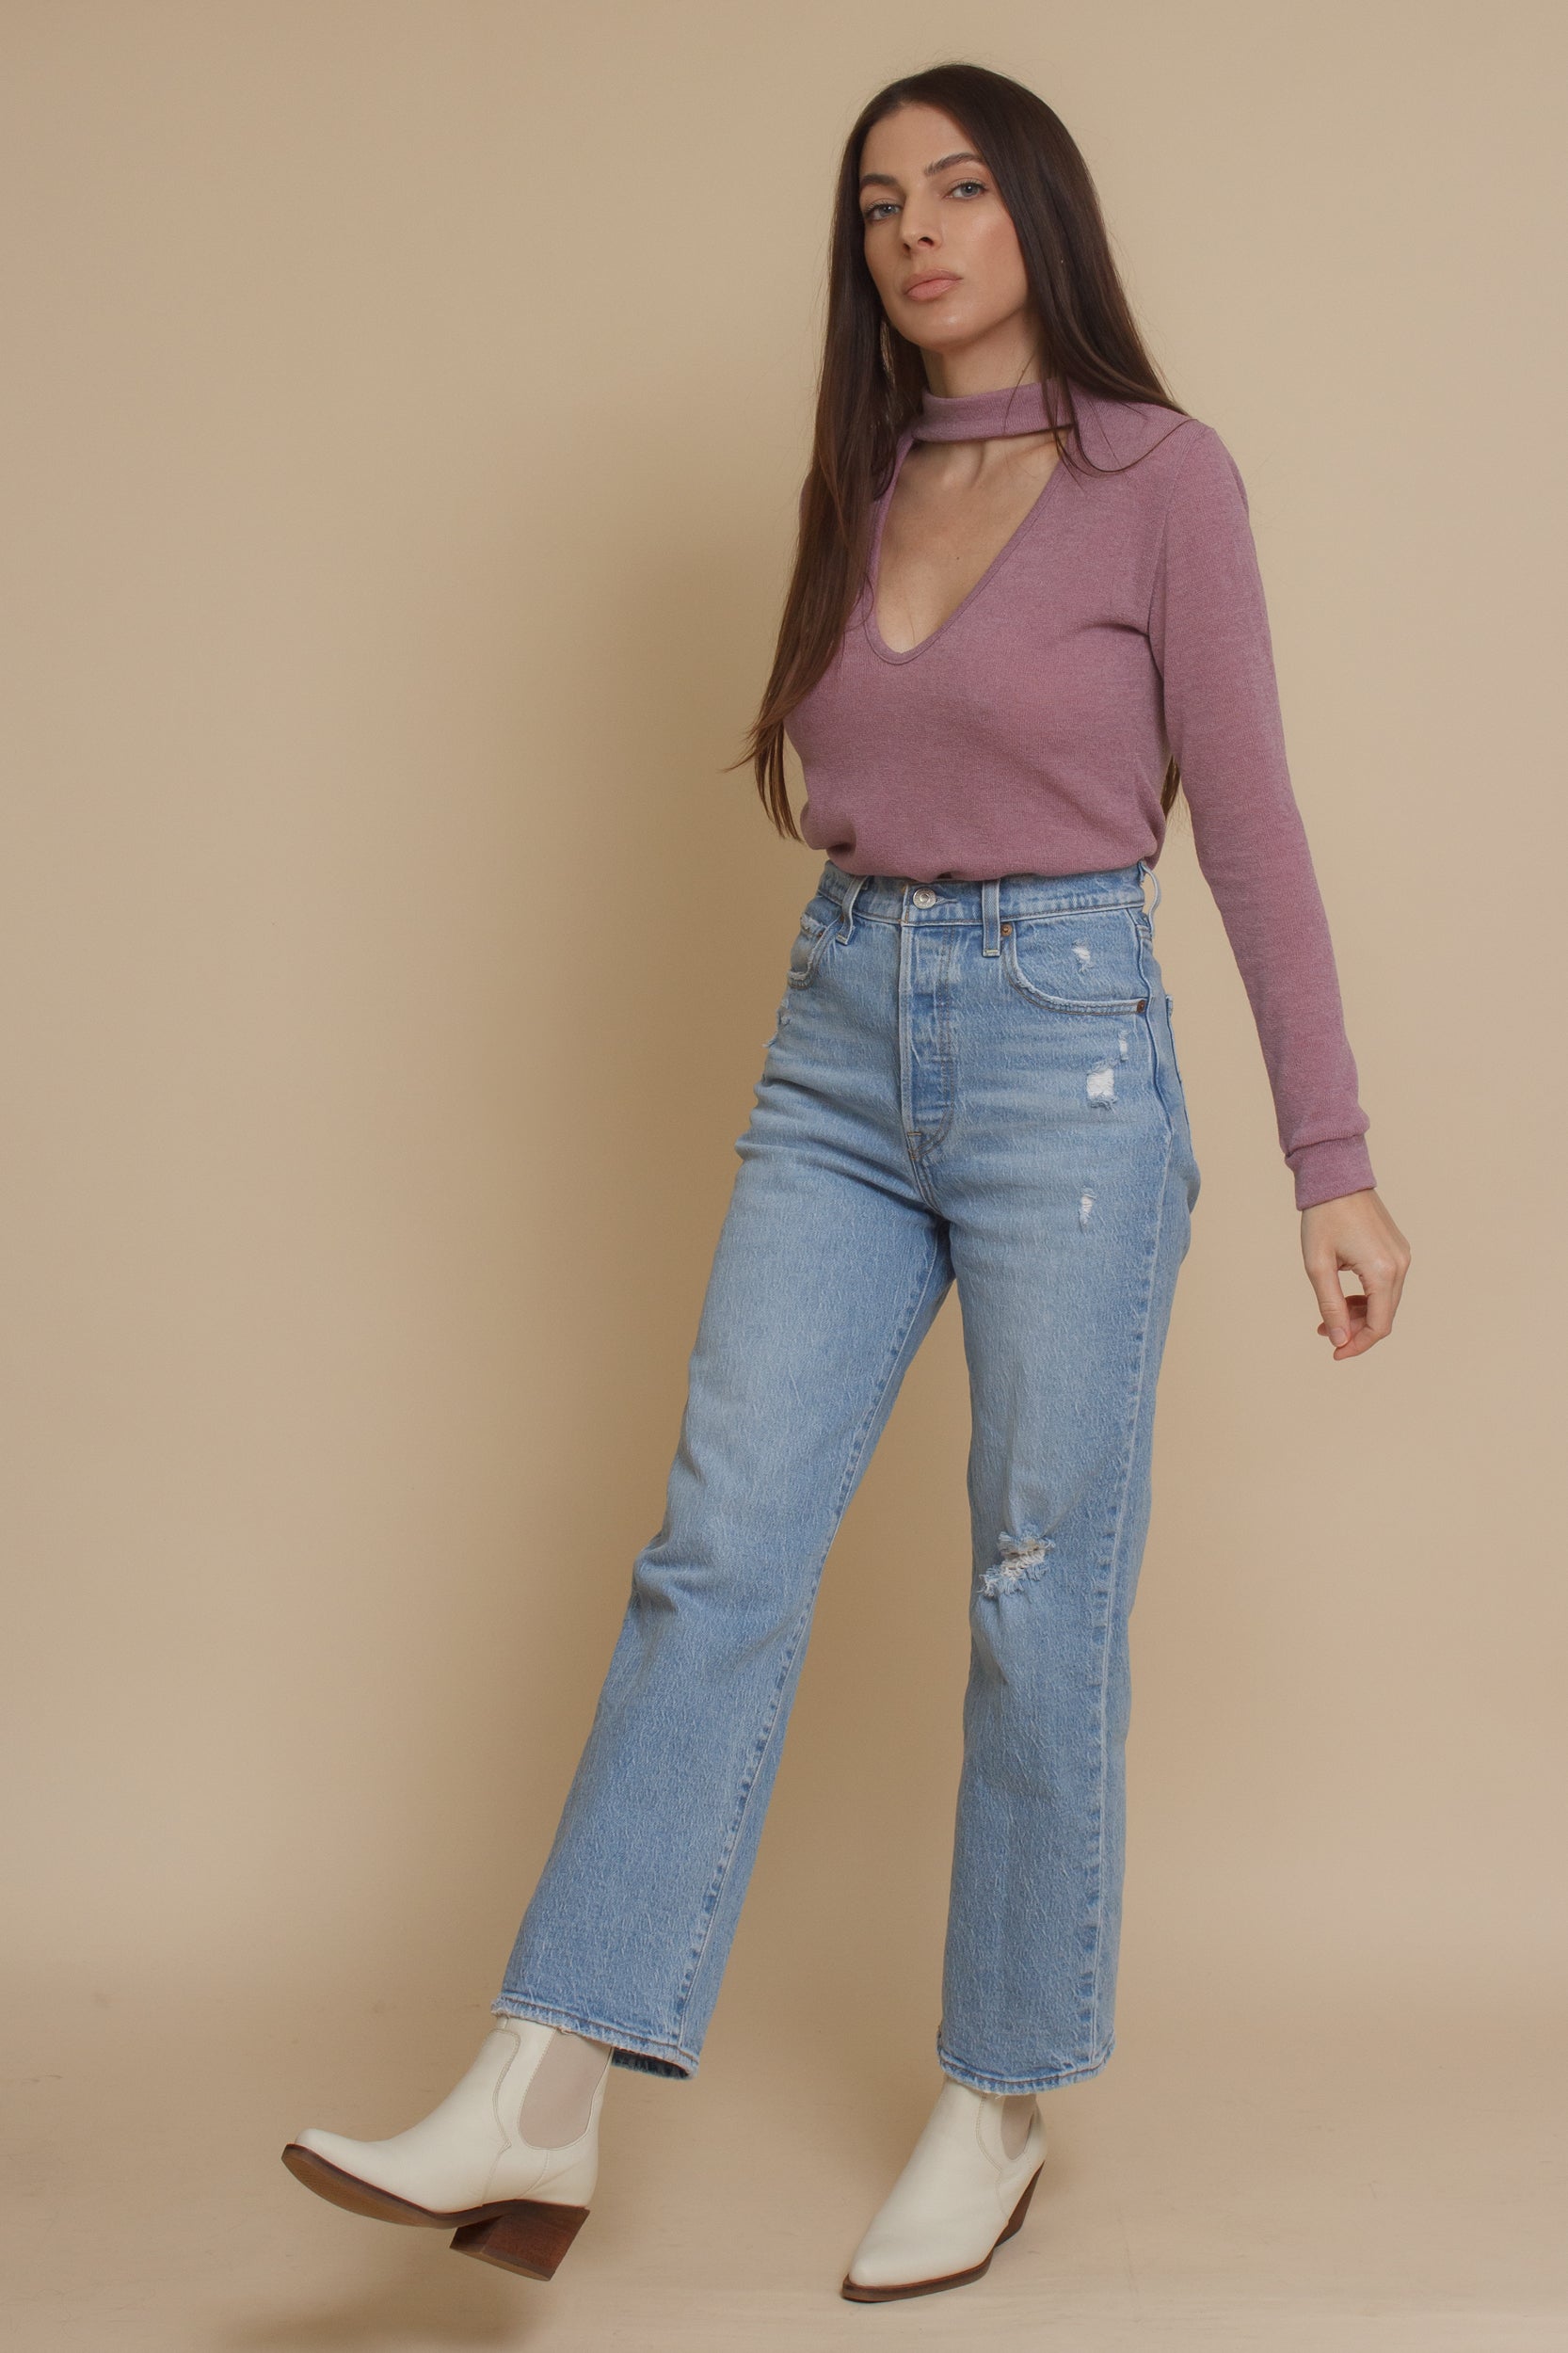 Knit top with choker cut out neckline, in mauve. Image 8